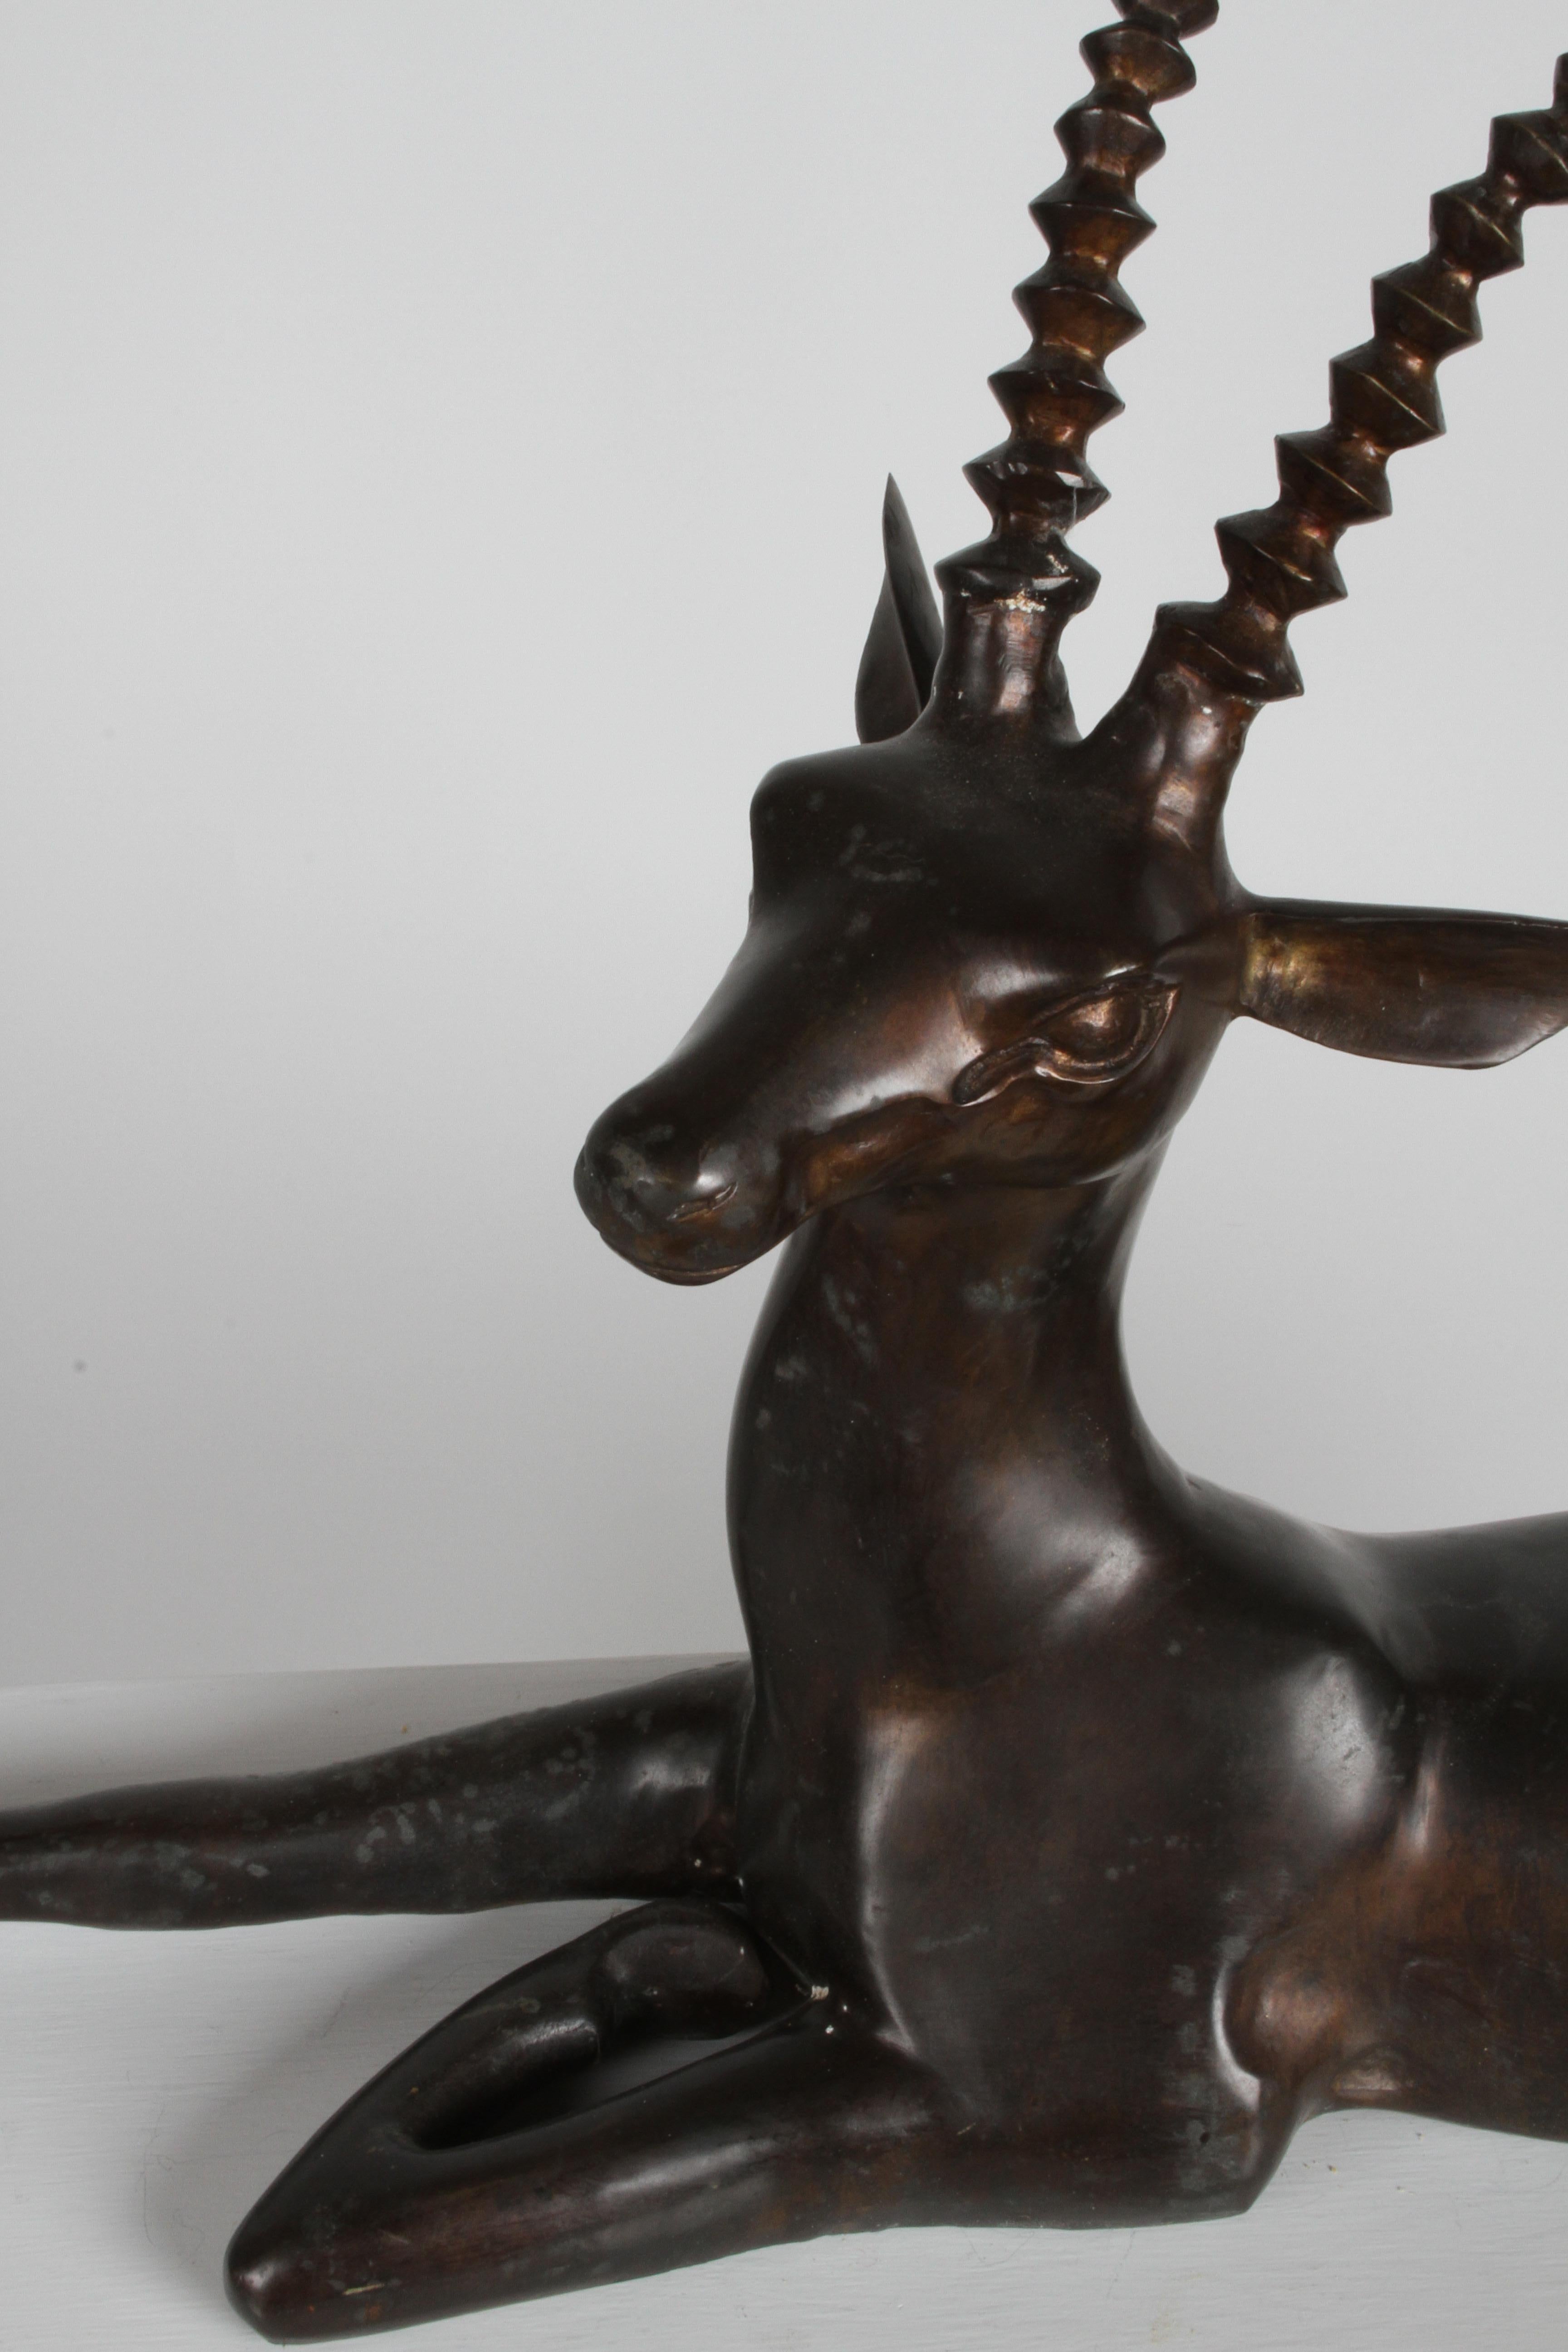 Large vintage bronze Gazelle sculpture in lying position with nice warm patina. Unsigned. Tape residue to underside.